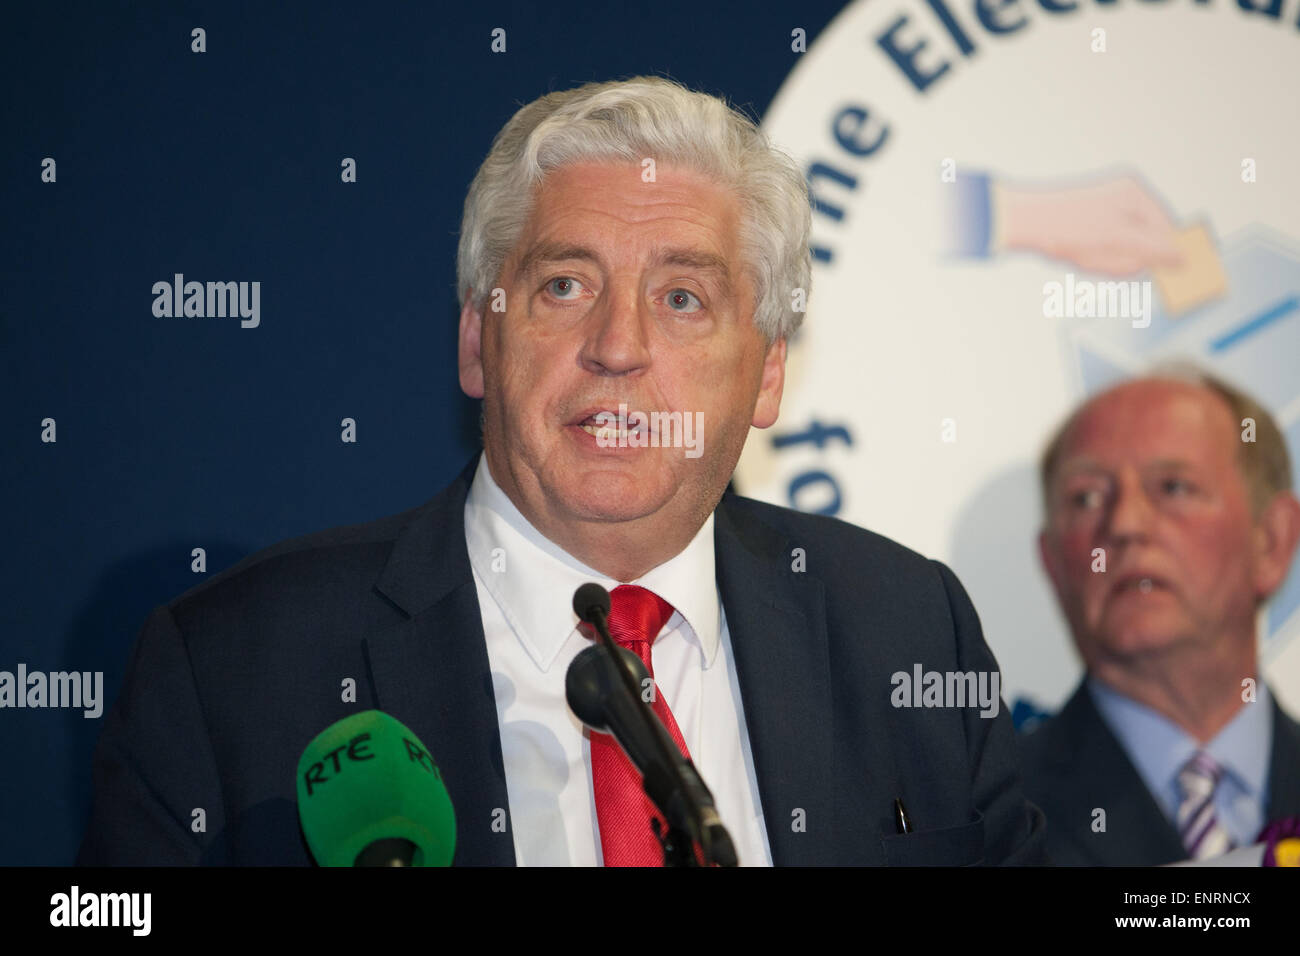 Belfast UK. 7th May 2015 General Election: Dr Allister McDonnell at his Acceptance Speech after taking the Seat of Belfast South Stock Photo